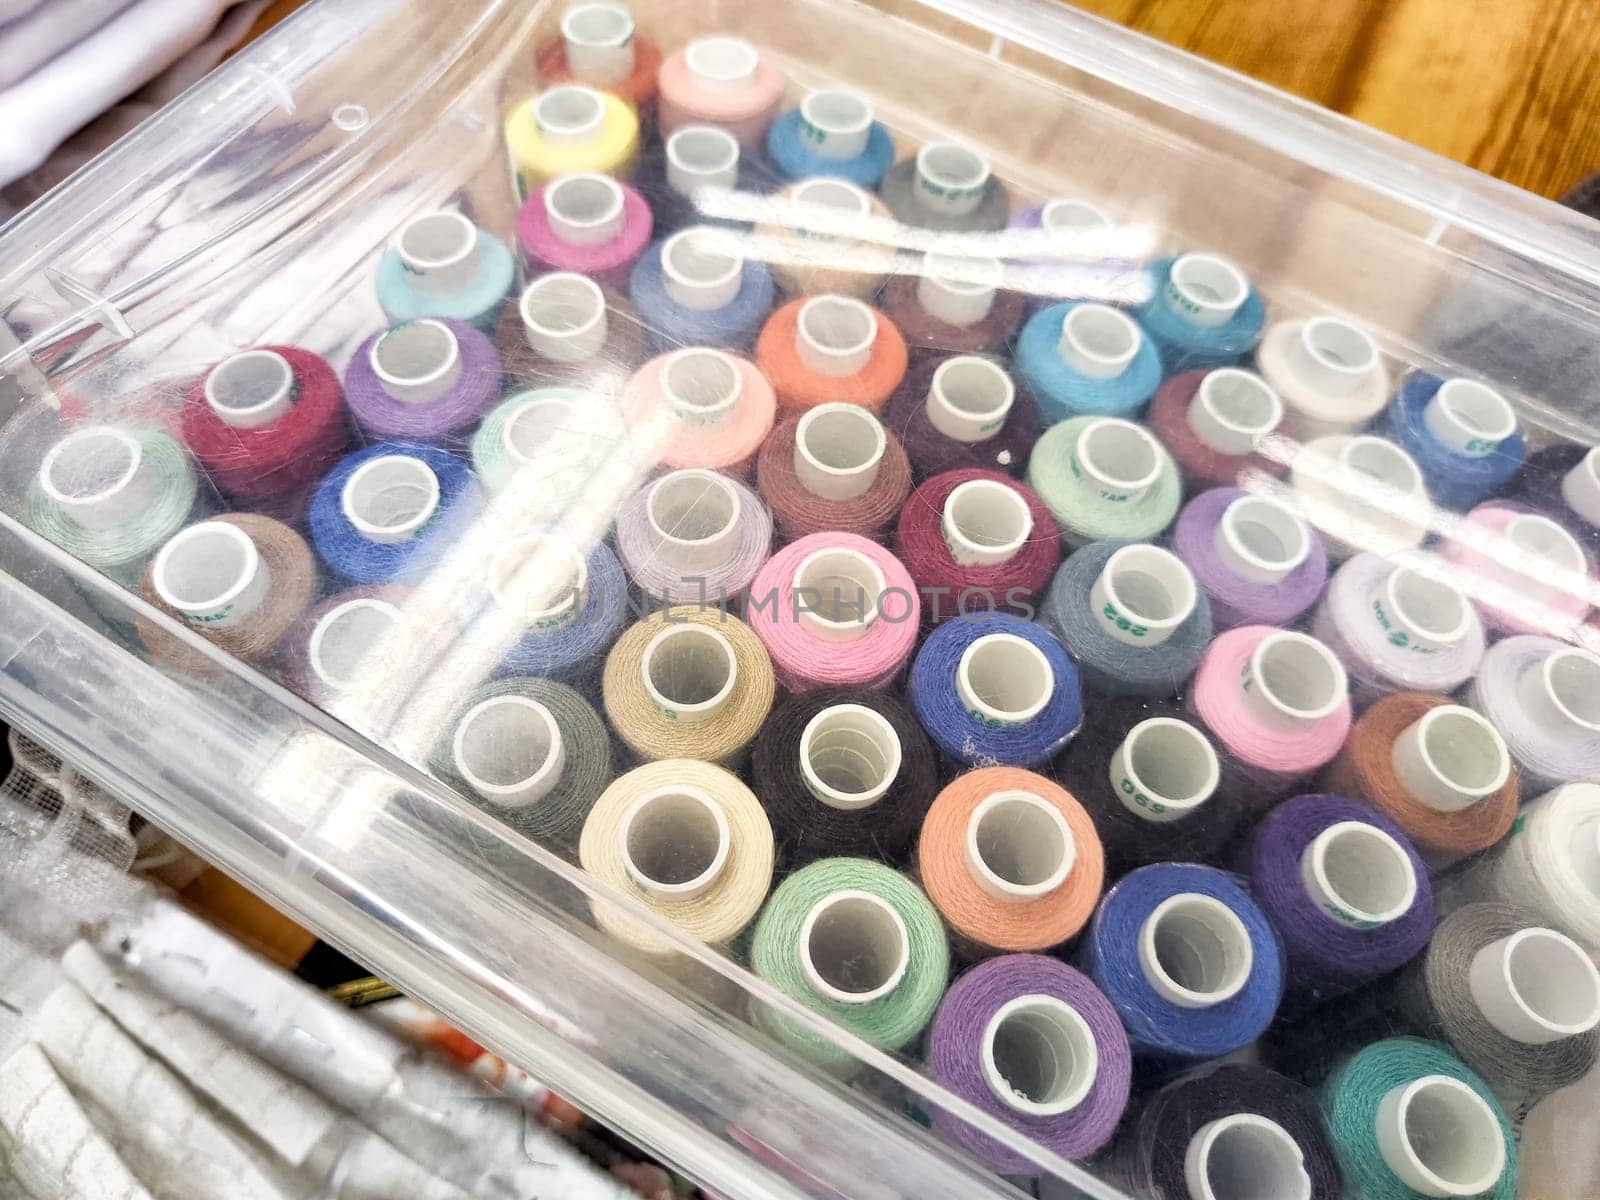 Vibrant Array of Thread Spools in a Transparent Storage Box. Colorful thread spools neatly arranged in a clear plastic container by keleny